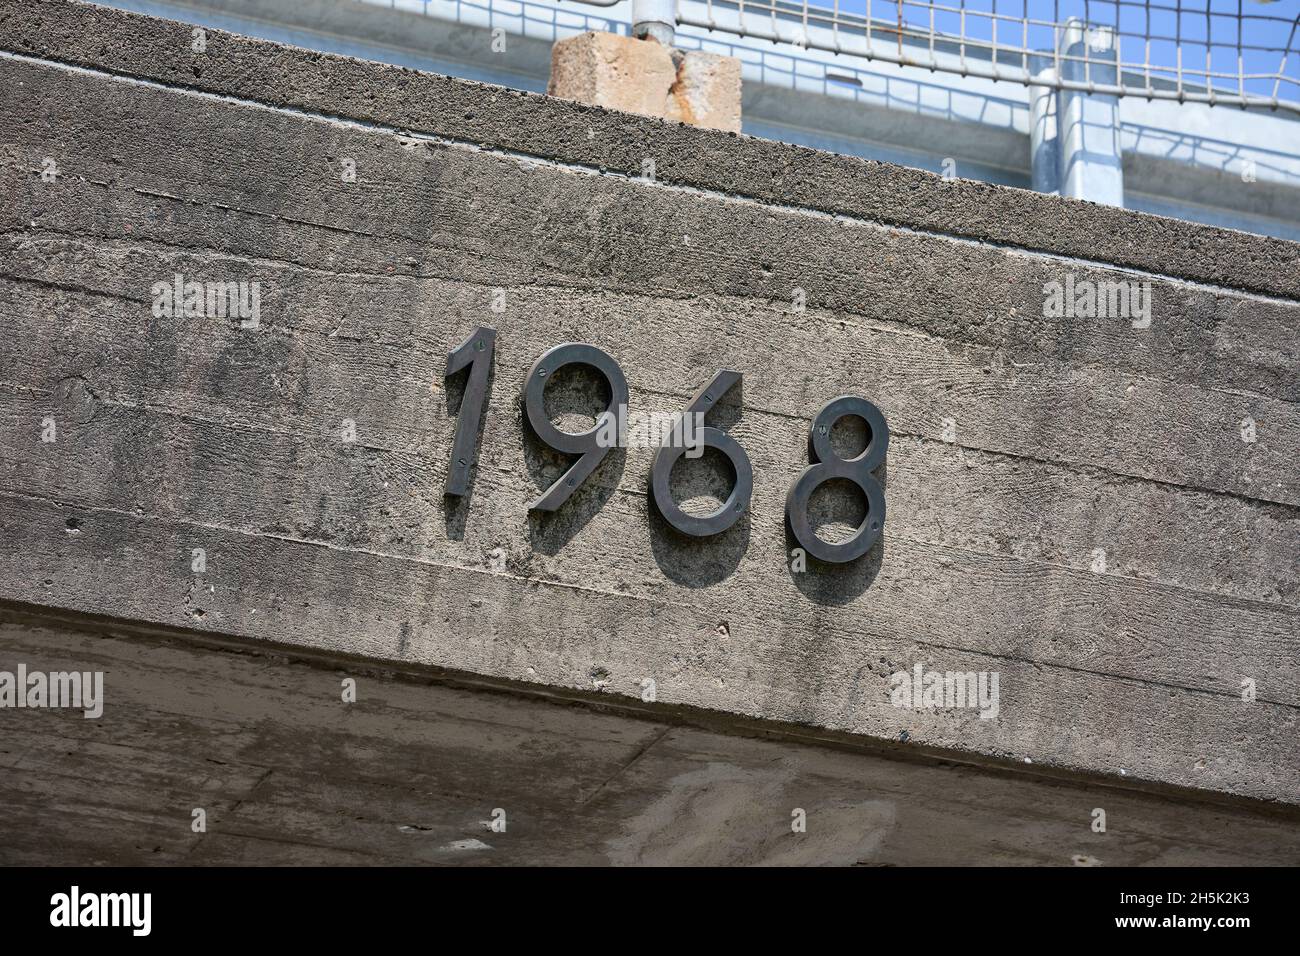 '1968', year in metal numbers on concrete background (side of bridge) Stock Photo